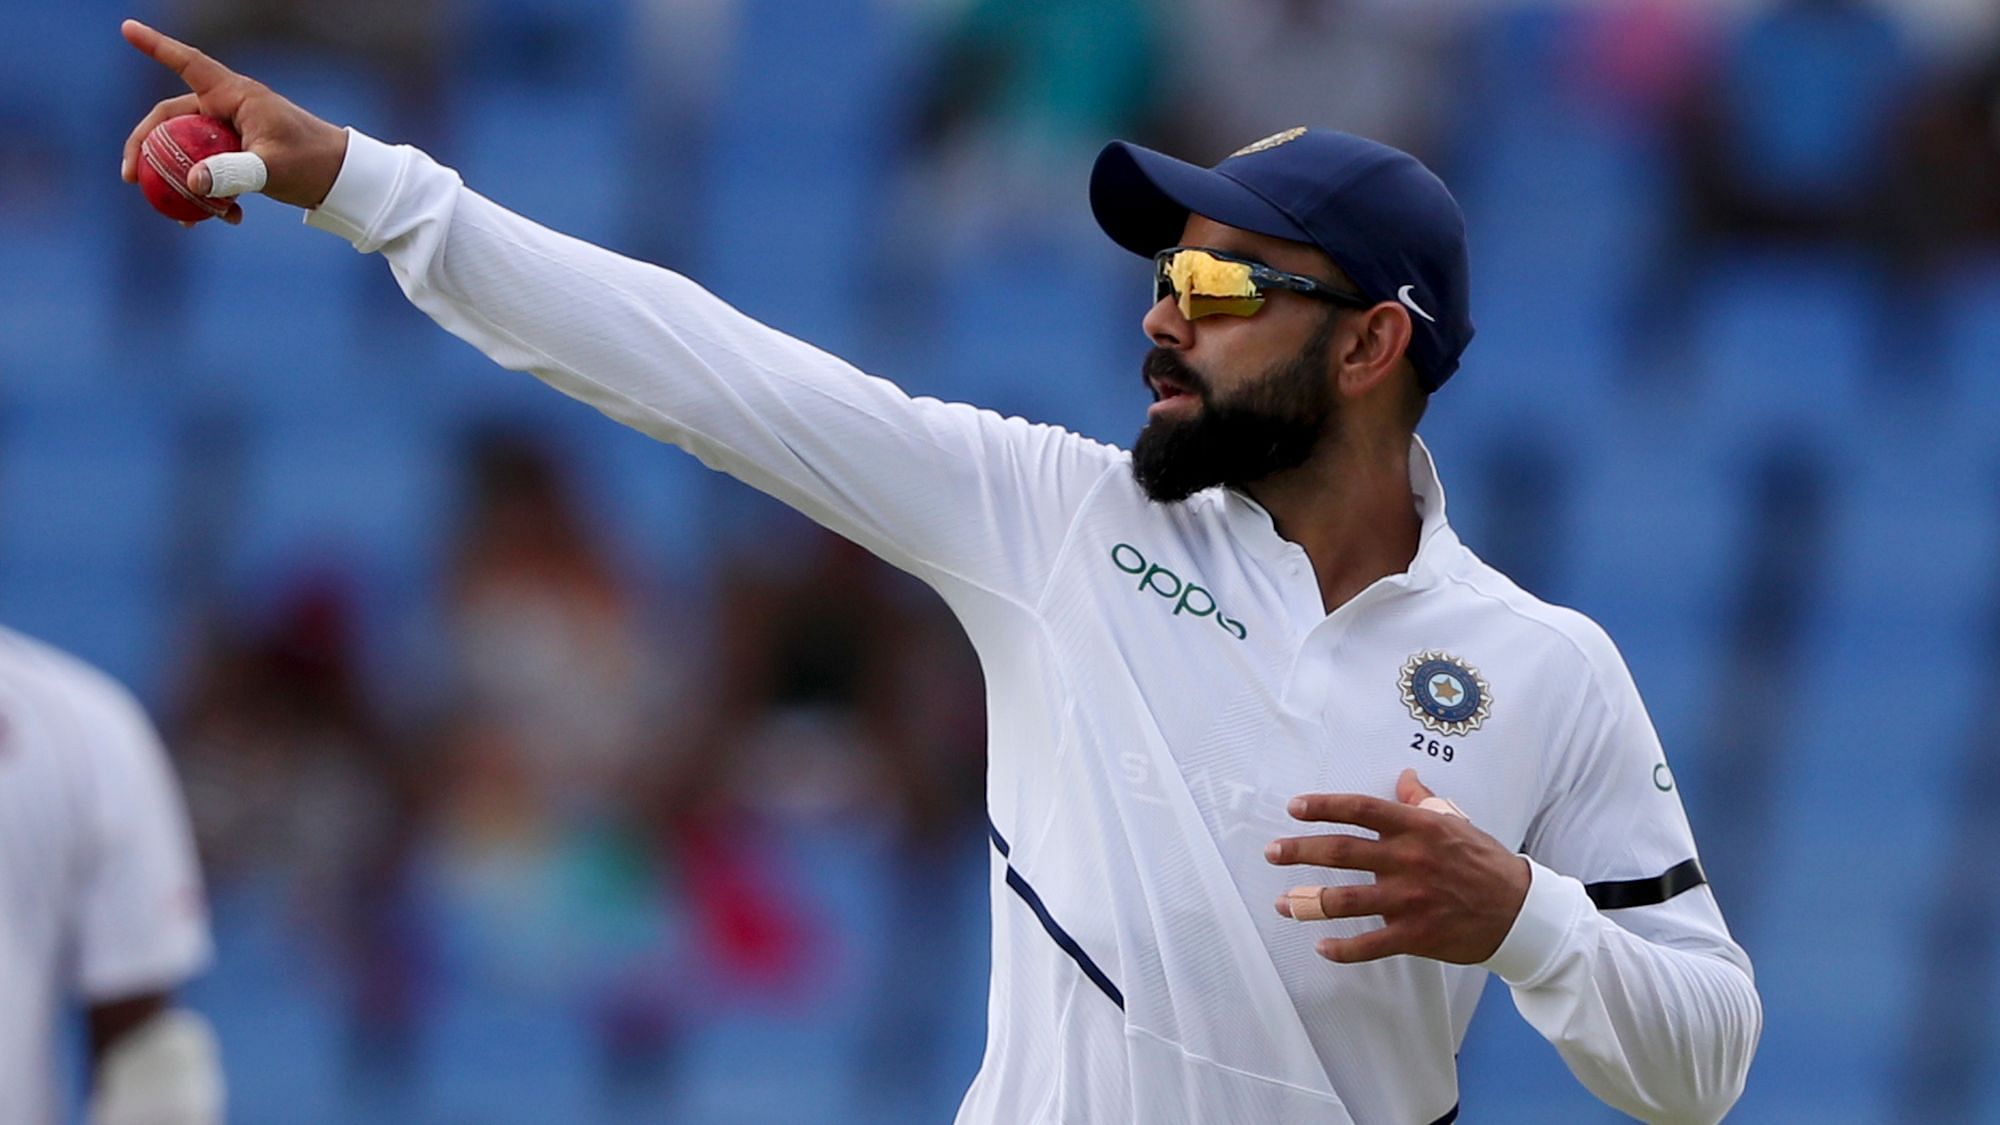 Virat Kohli equalled MS Dhoni’s record of most wins as Indian Test captain.